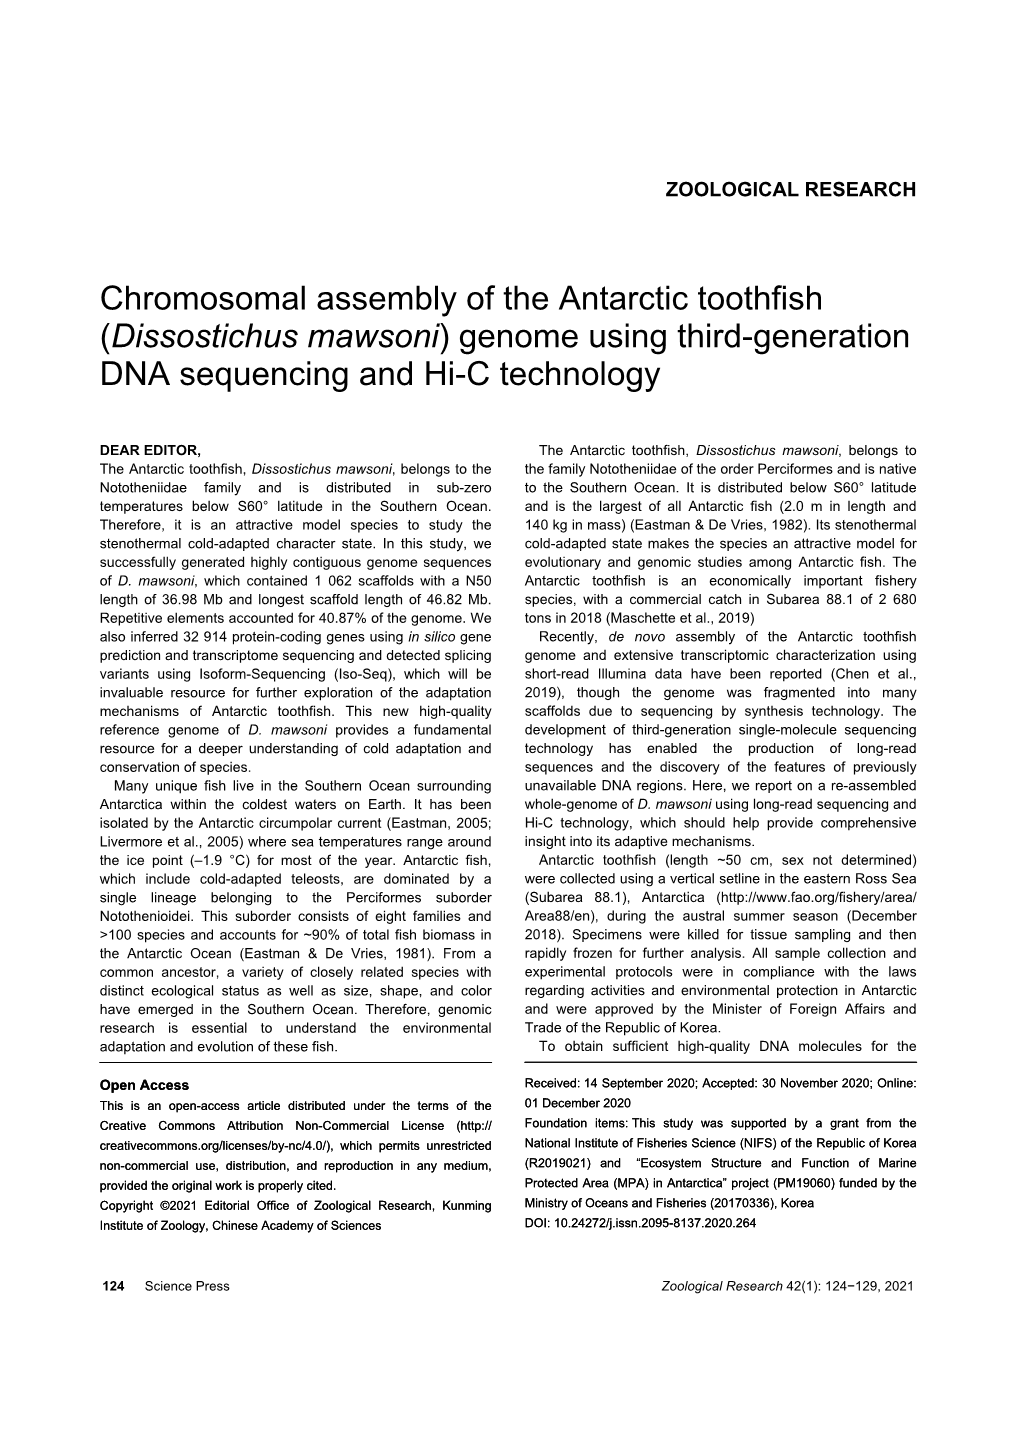 Chromosomal Assembly of the Antarctic Toothfish (Dissostichus Mawsoni) Genome Using Third-Generation DNA Sequencing and Hi-C Technology